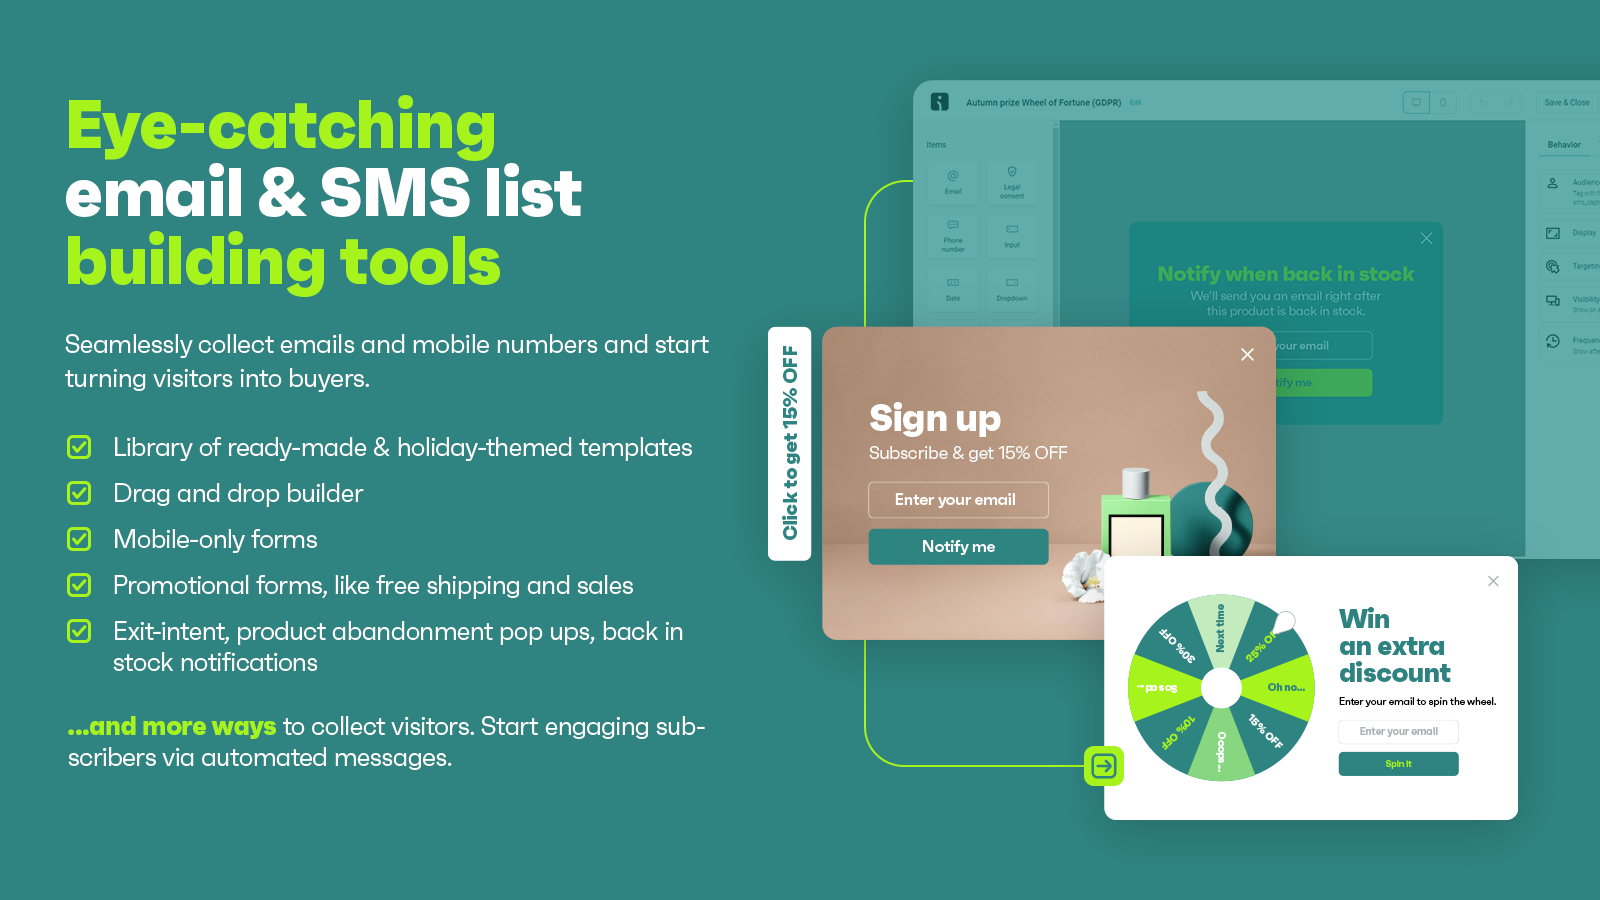 Email Marketing & SMS: sales reporting, abandoned cart, capture